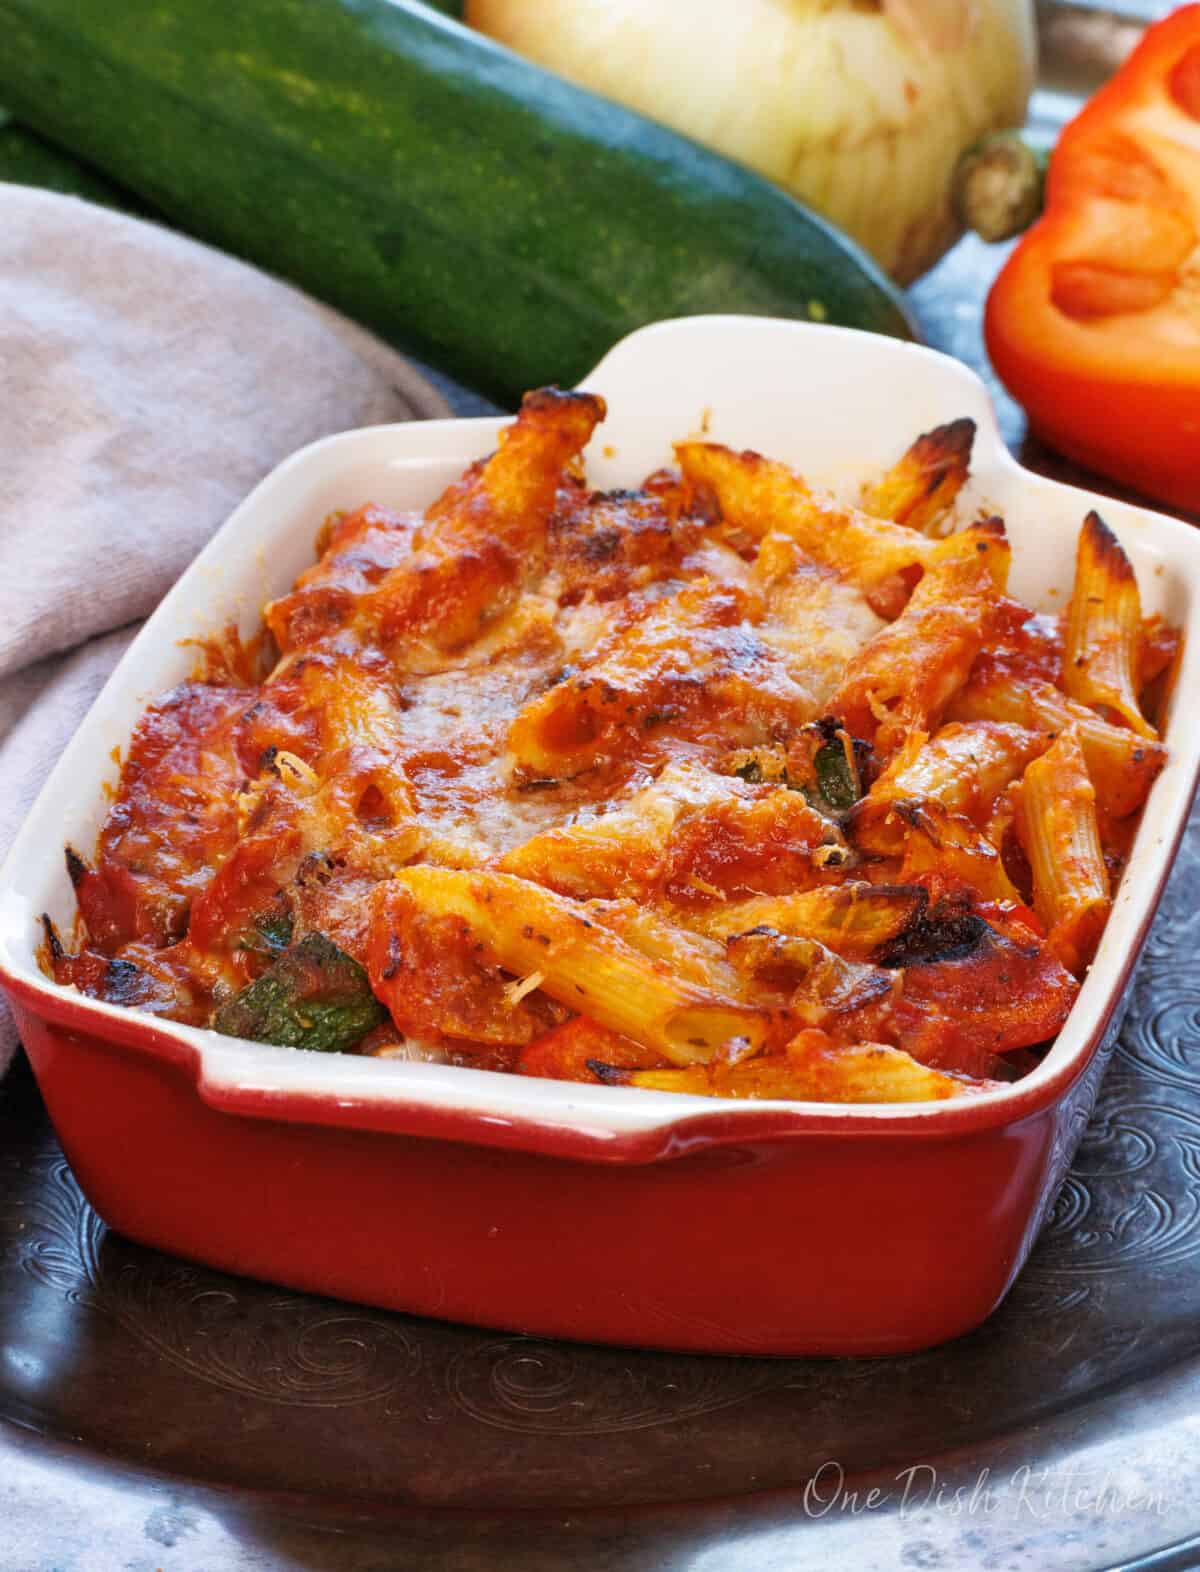 Baked Penne With Roasted Vegetables | One Dish Kitchen